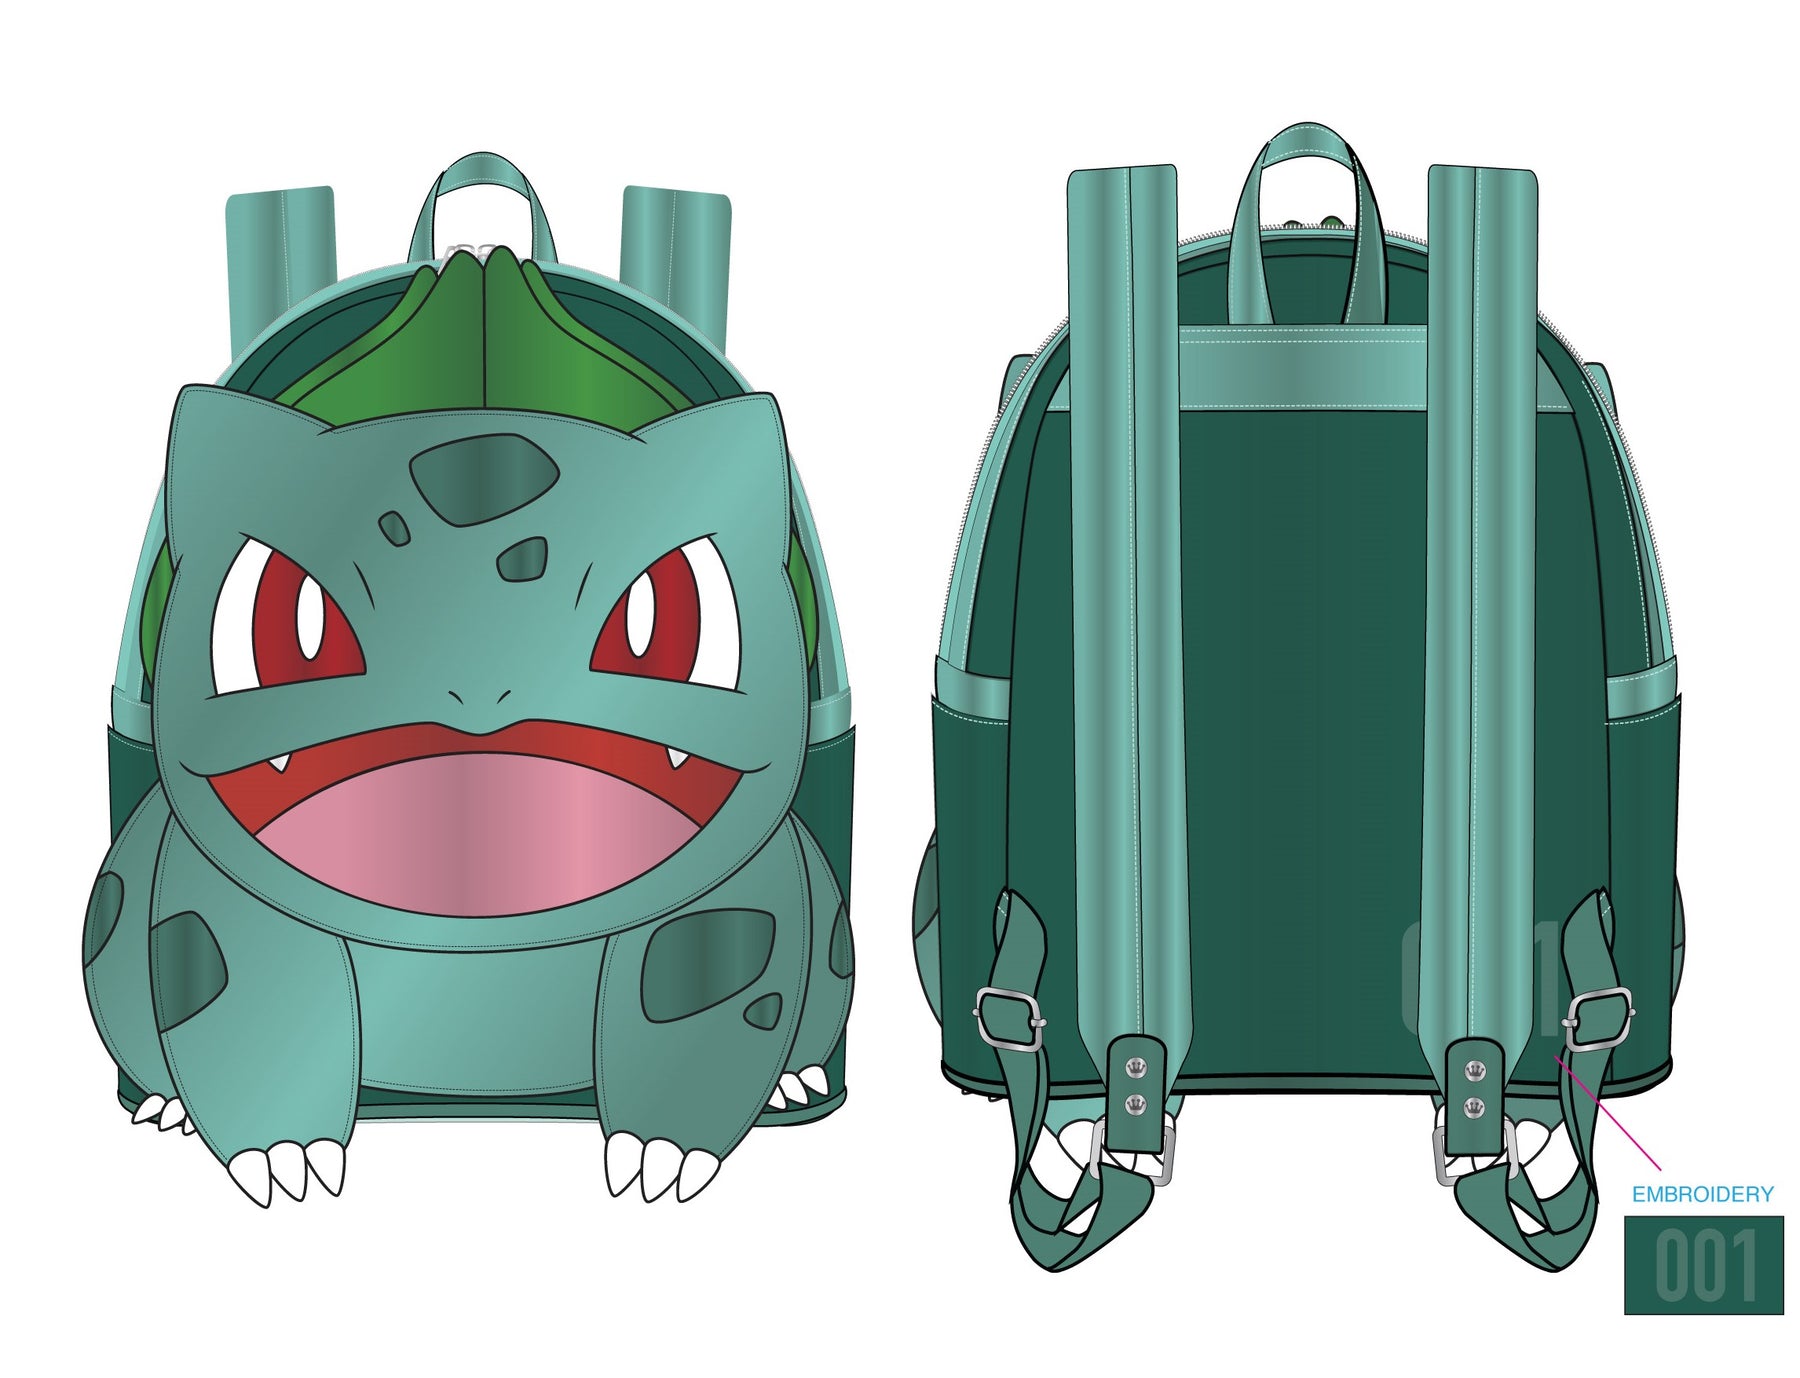 LOUNGEFLY POKEMON BULBASAUR AOP MINI BACKPACK – Collectors Outlet llc